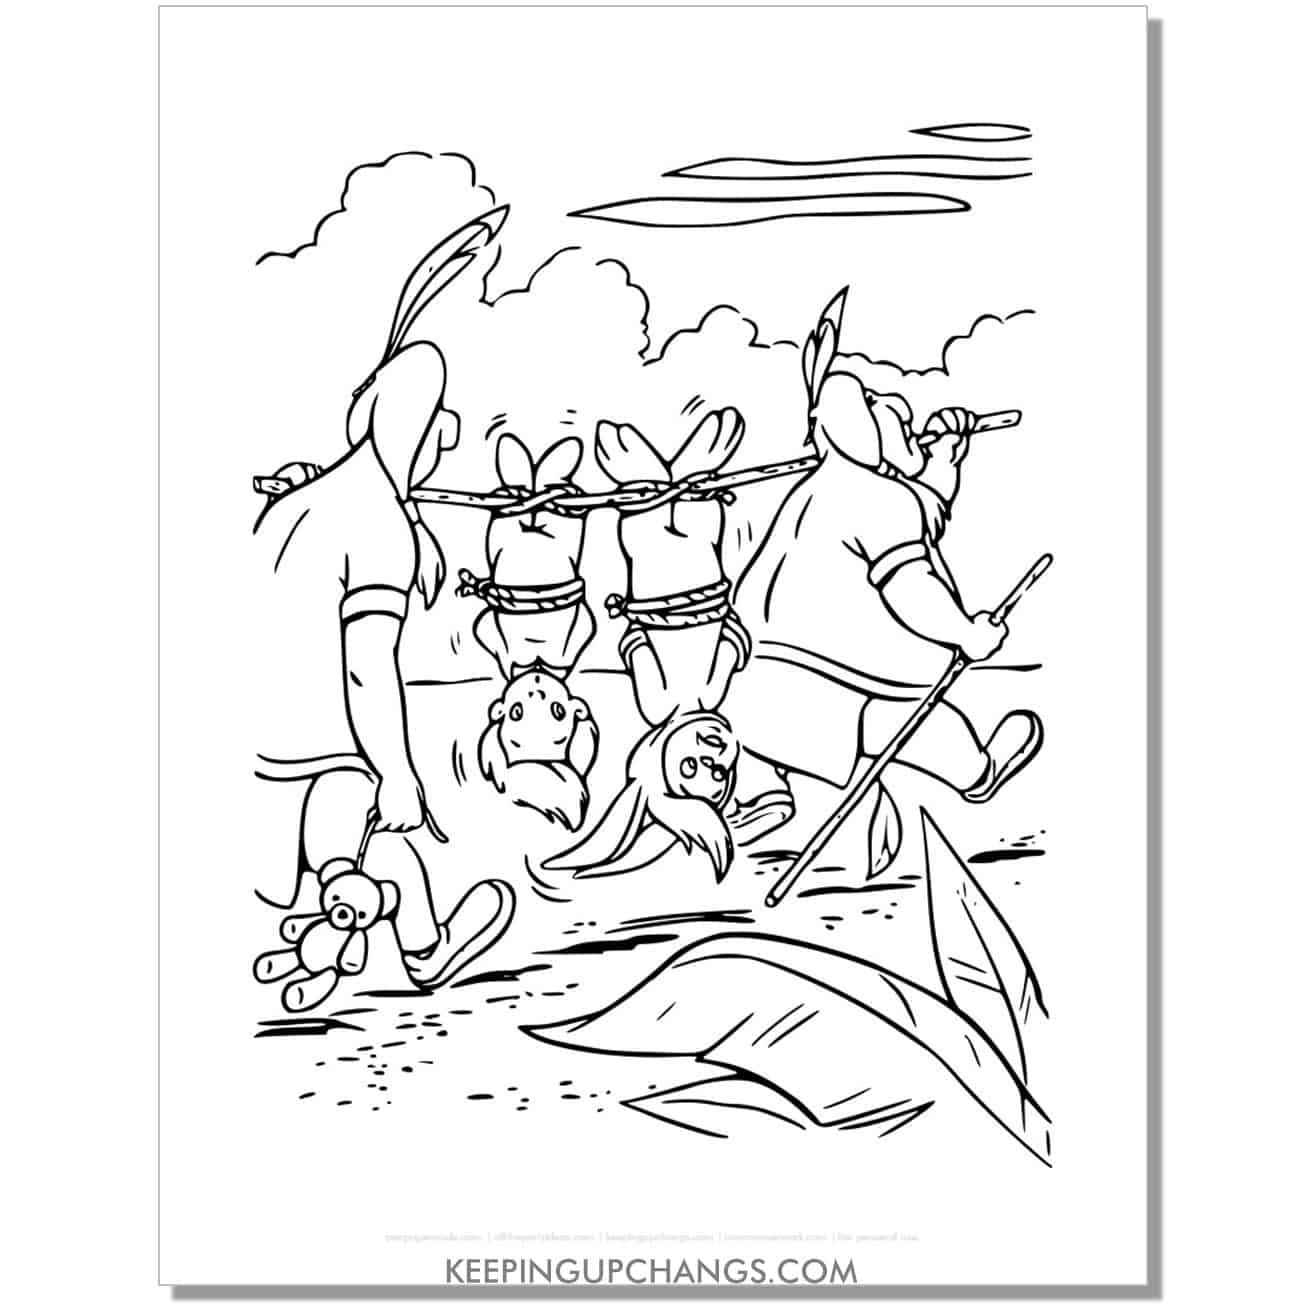 native americans carry lost boys on rope coloring page, sheet.